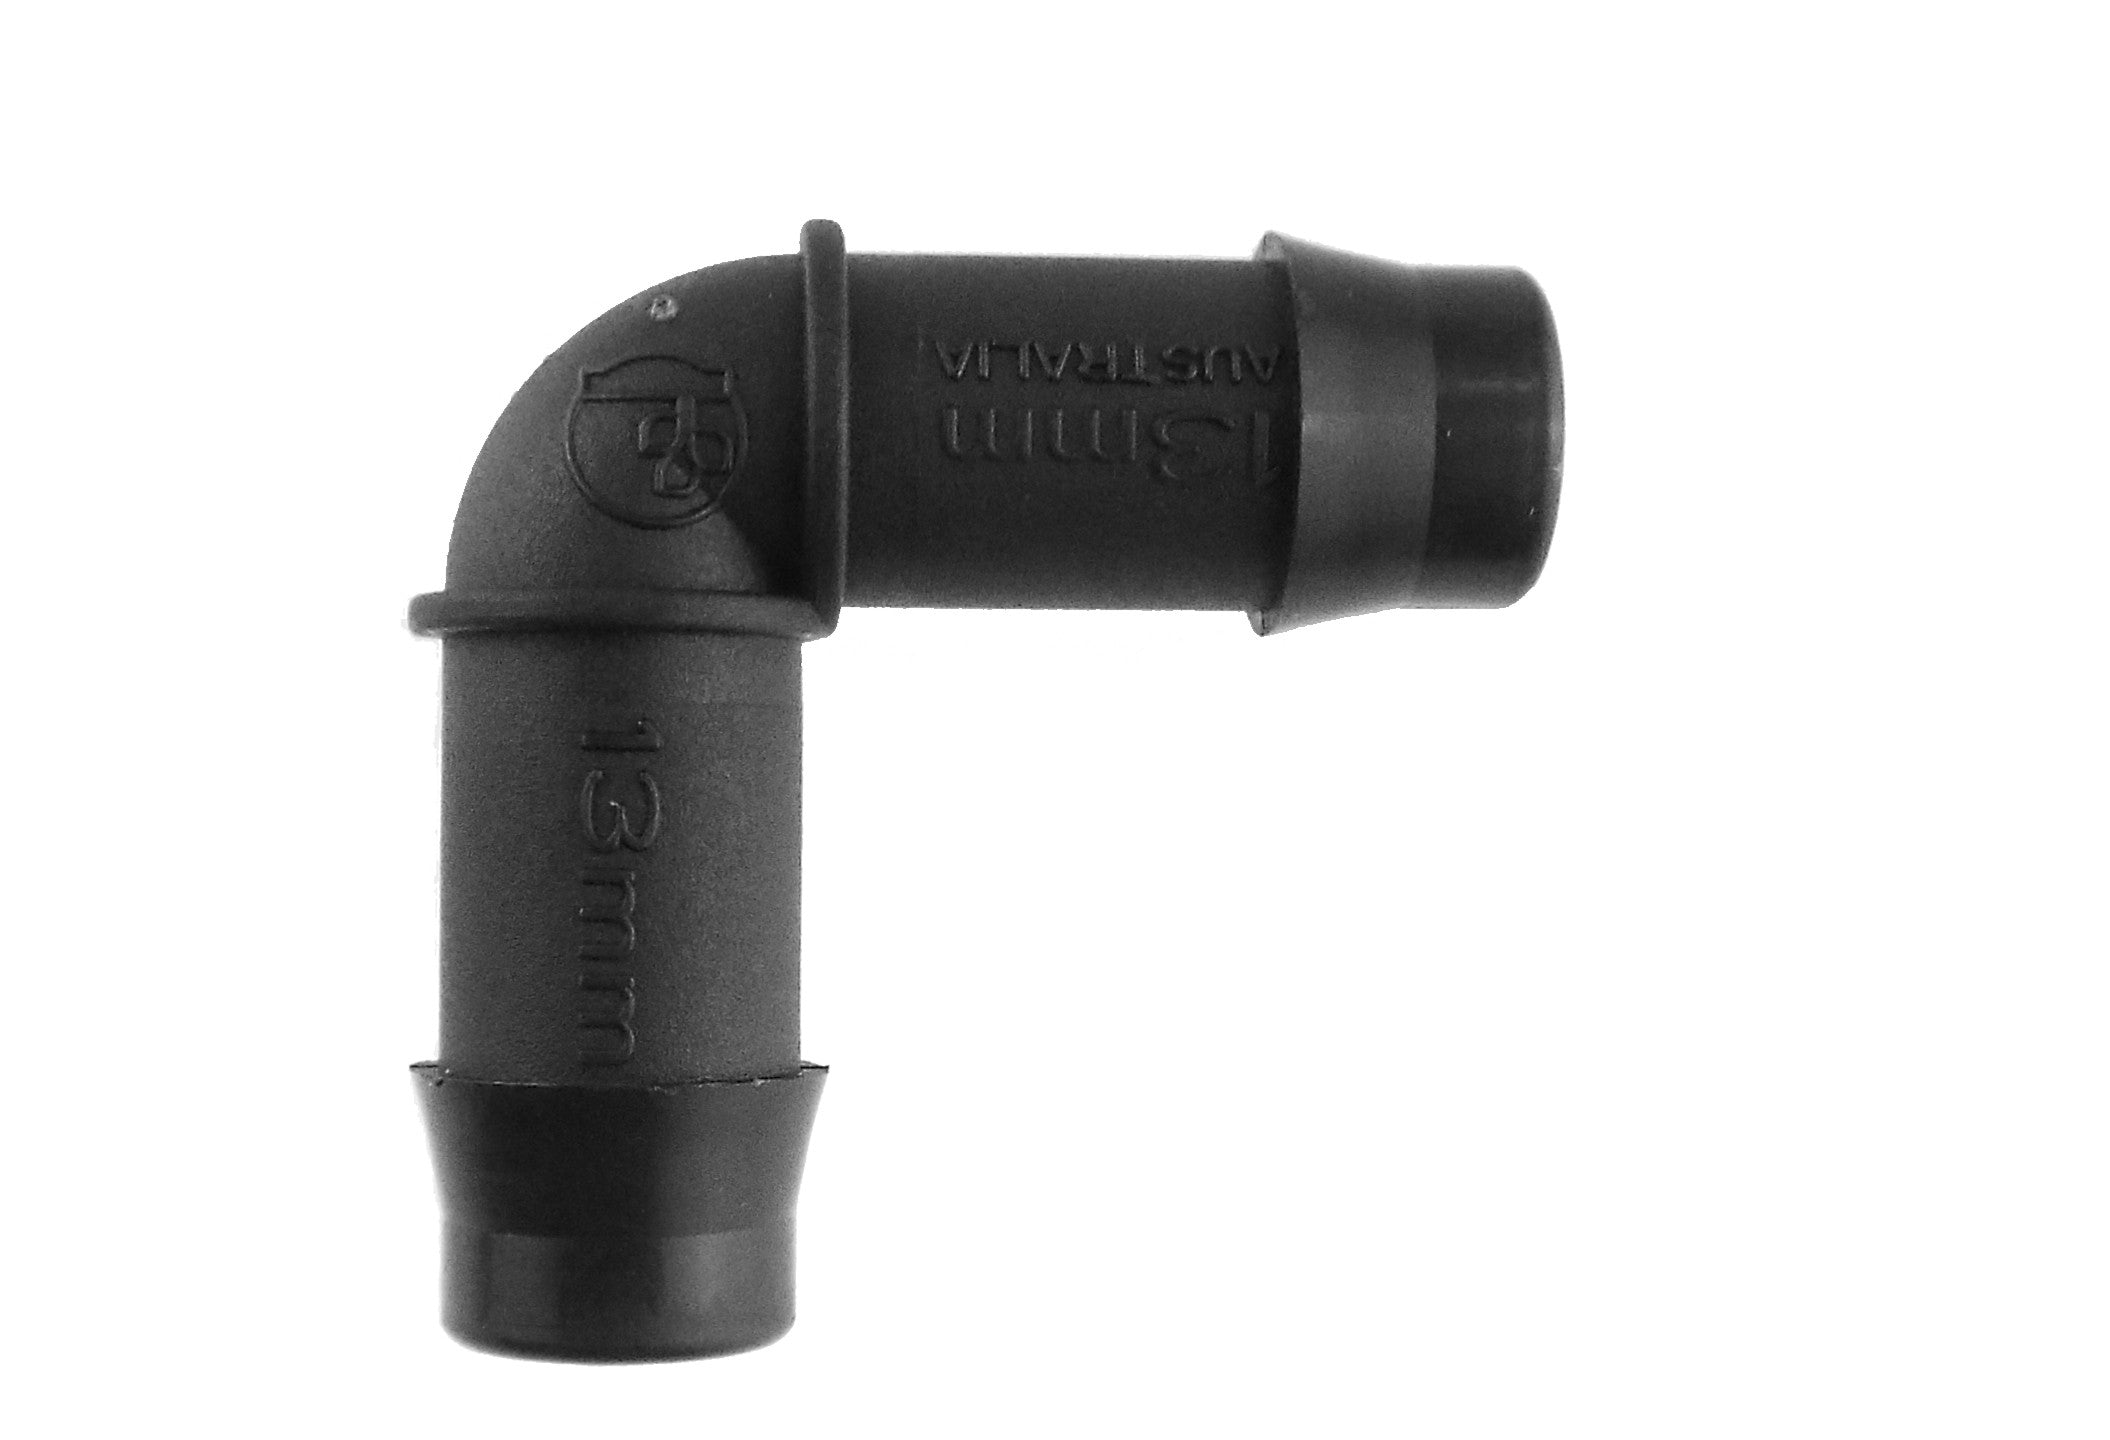 Antelco Barbed Elbow 19mm